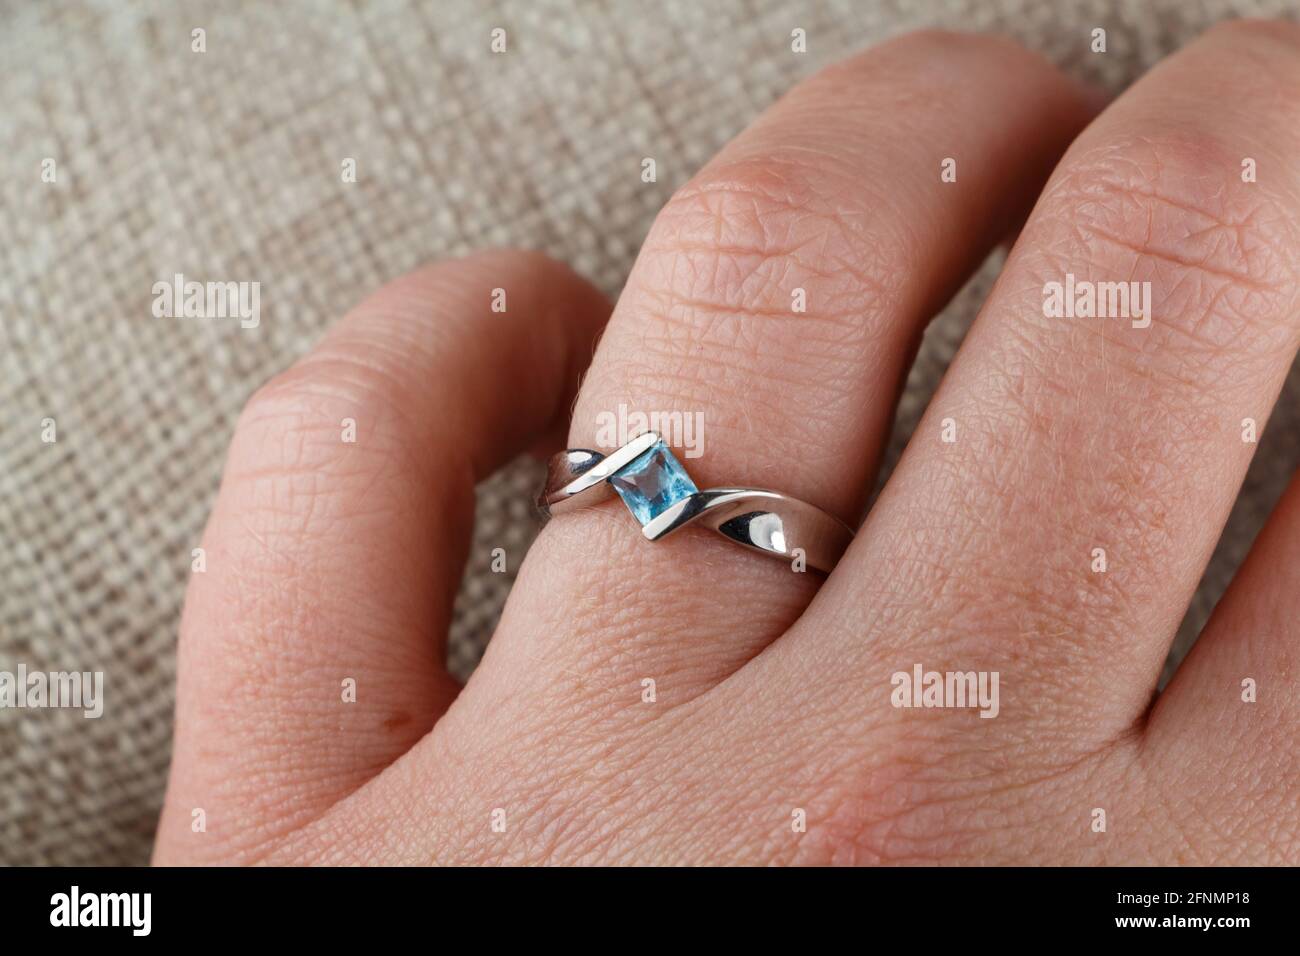 Ring made with white gold and aquamarine on the hand of a woman Stock Photo